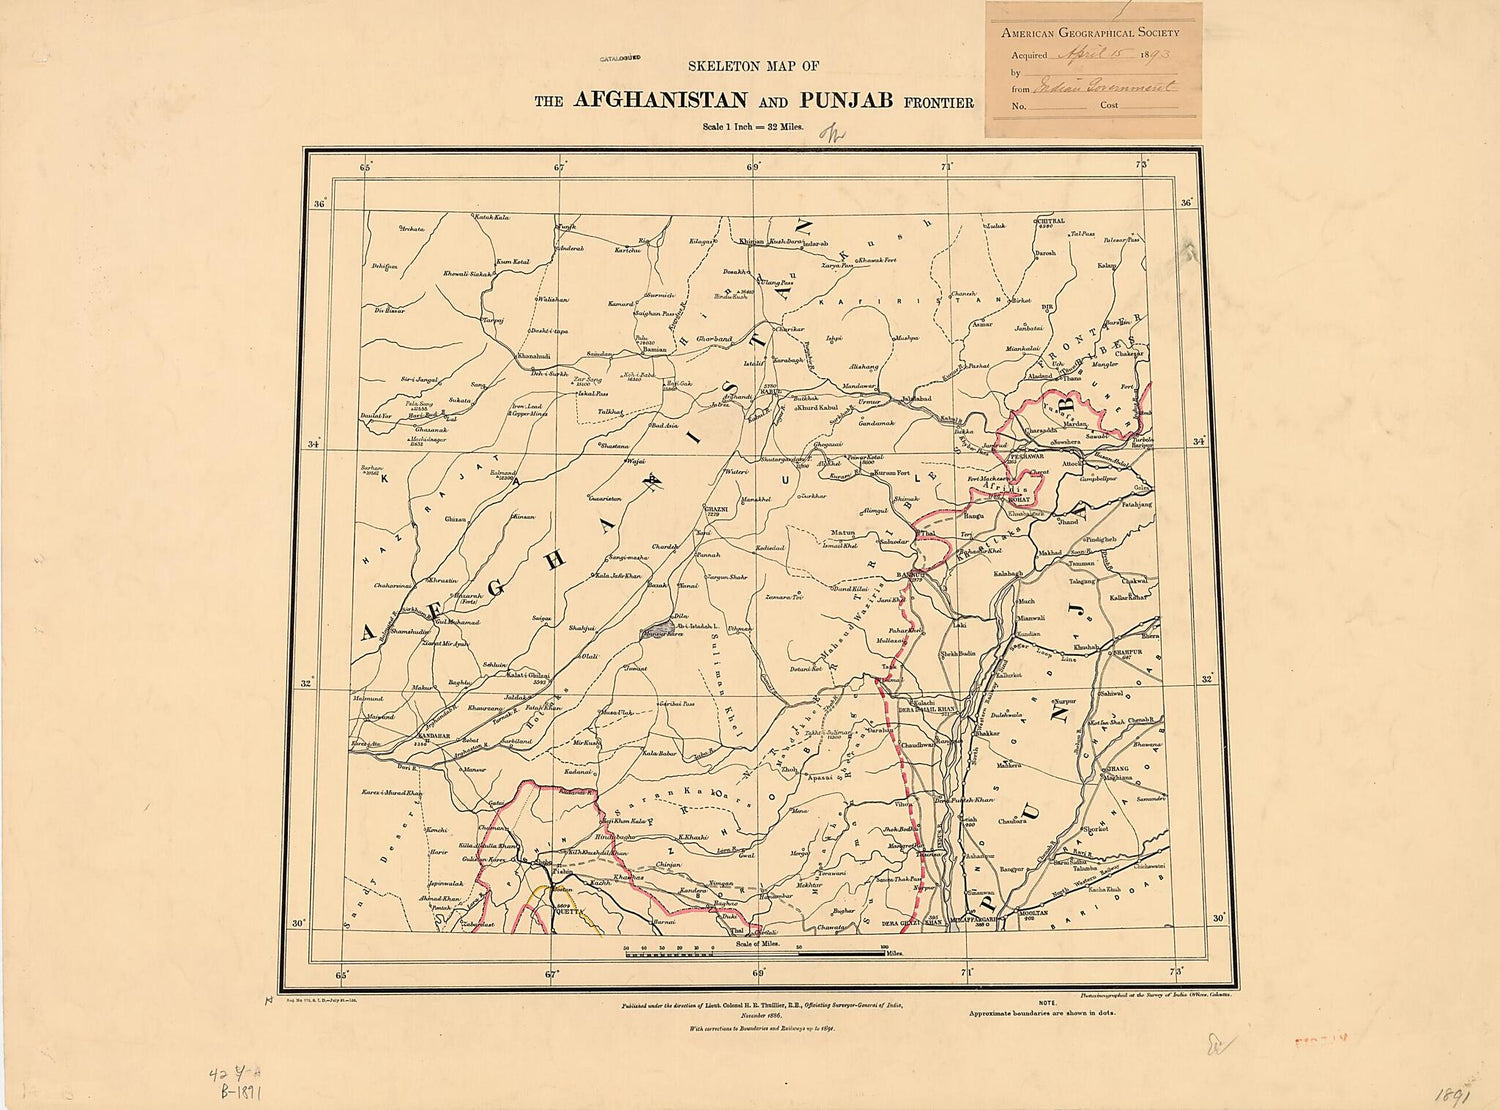 This old map of Skeleton Map of the Afghanistan and Punjab Frontier from 1891 was created by  Survey of India, H. R. (Henry Ravenshaw) Thuillier in 1891